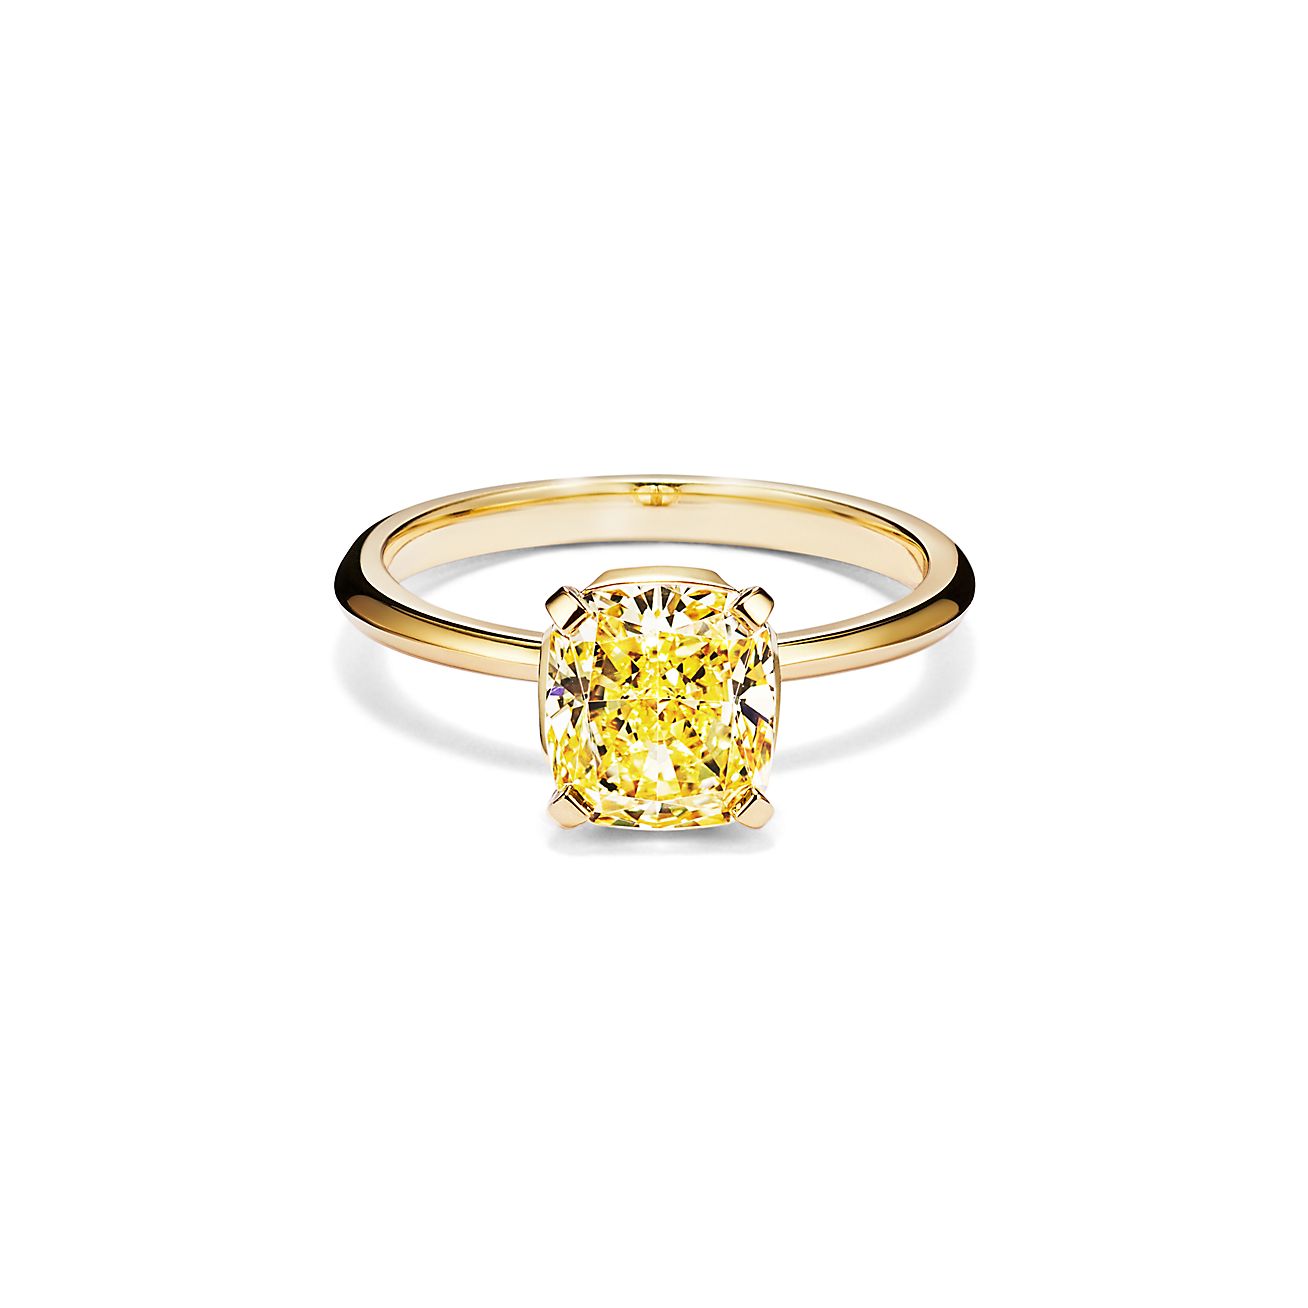 tiffany true engagement ring with a cushion cut yellow diamond in 18k yellow gold 63515027 998457 ED